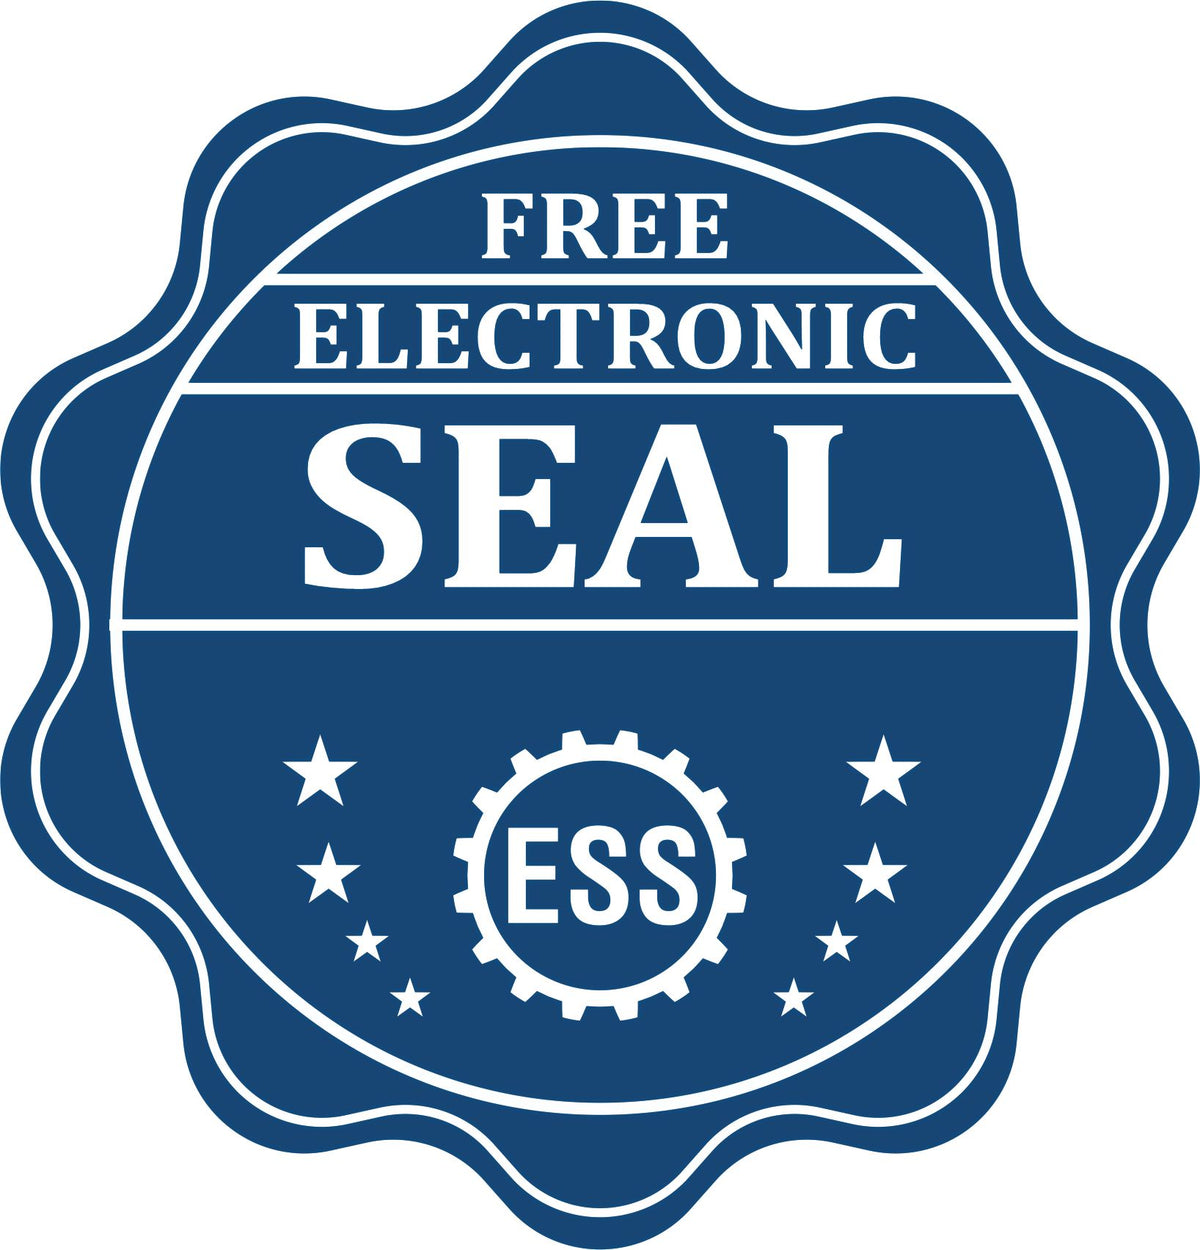 A badge showing a free electronic seal for the Heavy-Duty Alaska Rectangular Notary Stamp with stars and the ESS gear on the emblem.